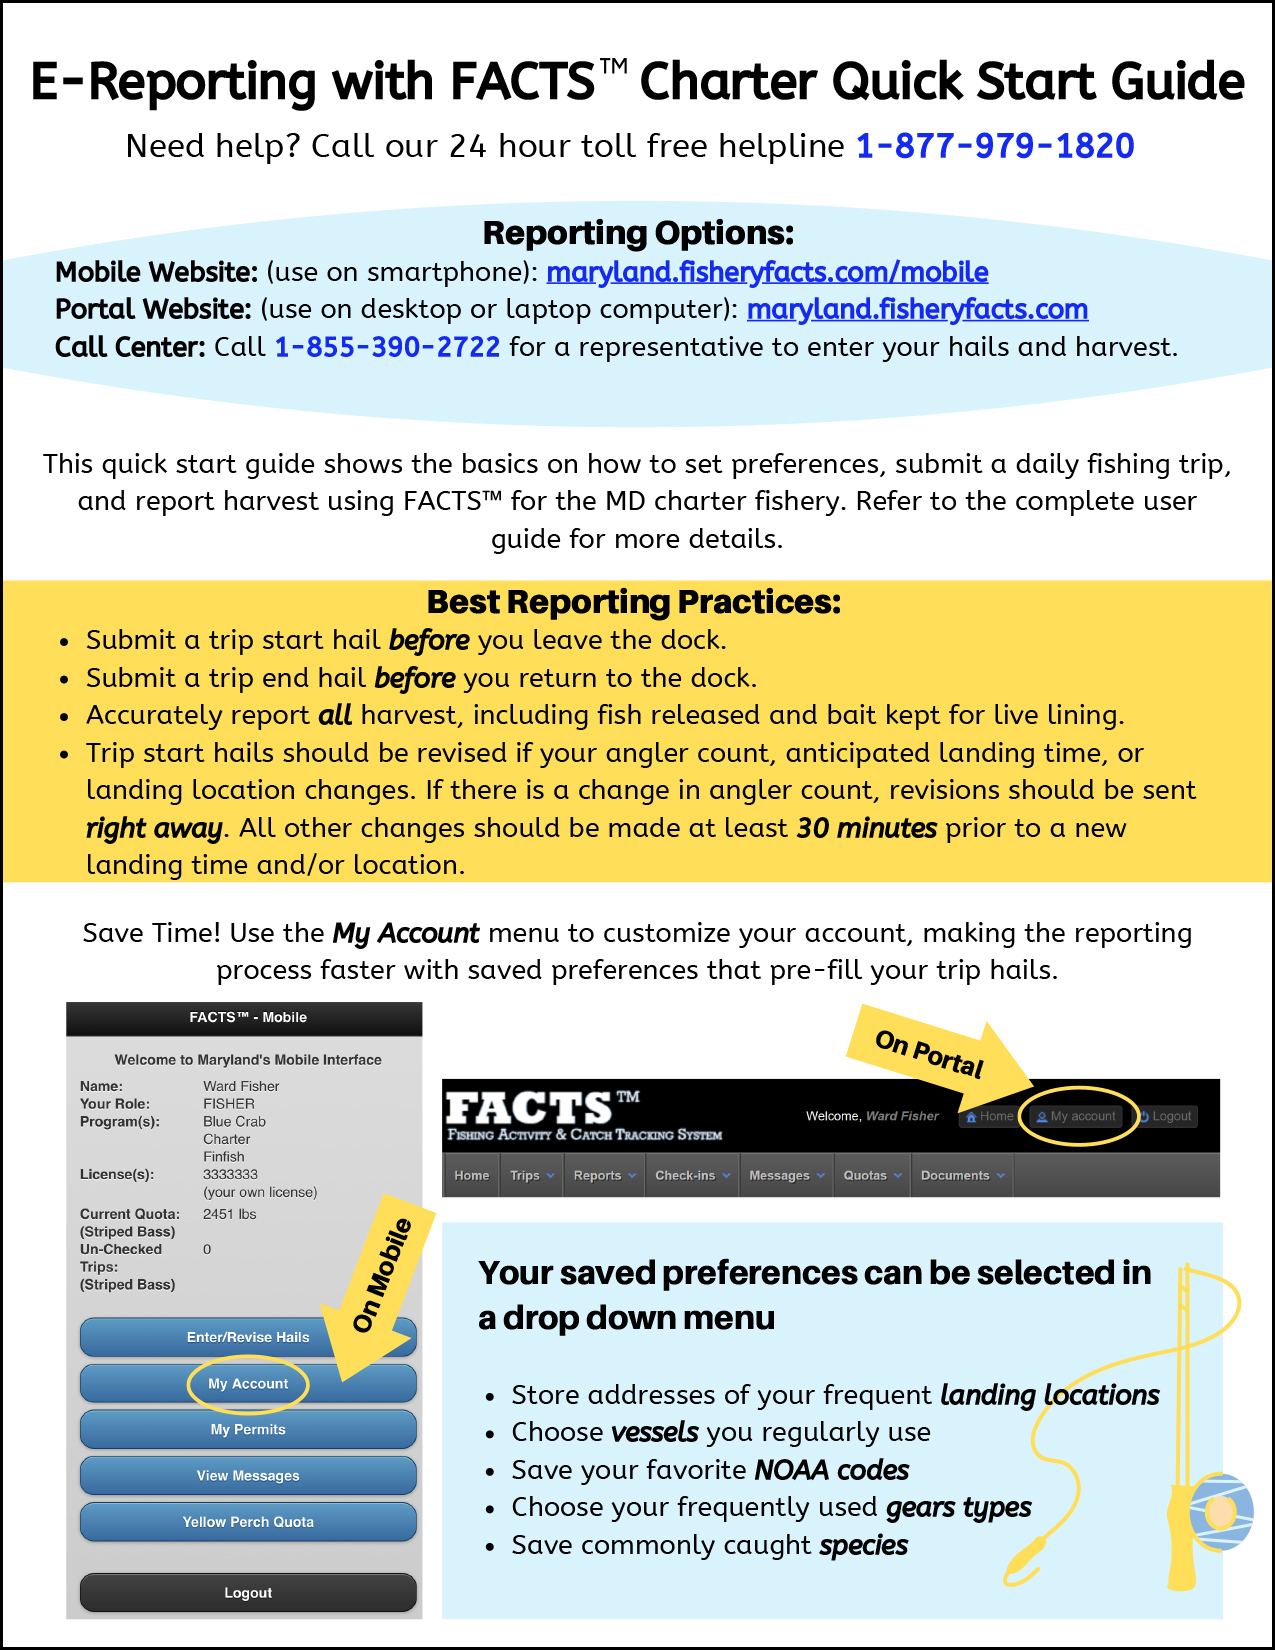 E-Reporting with FACTS Charter Quick Start Guide